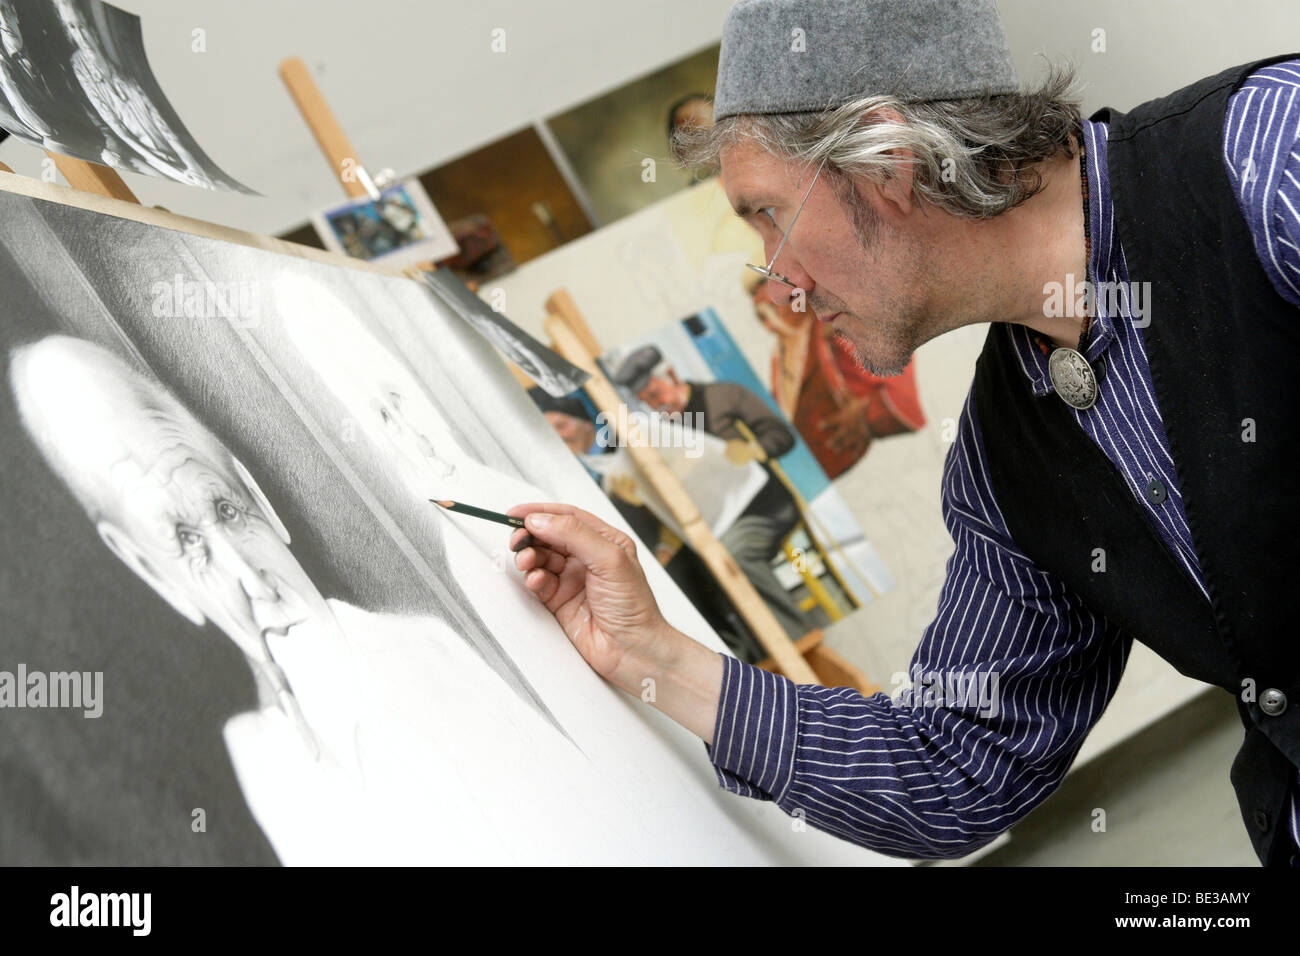 The painter Heribert Elzer working on a portrait in his studio in Andernach, Rhineland-Palatinate, Germany, Europe Stock Photo